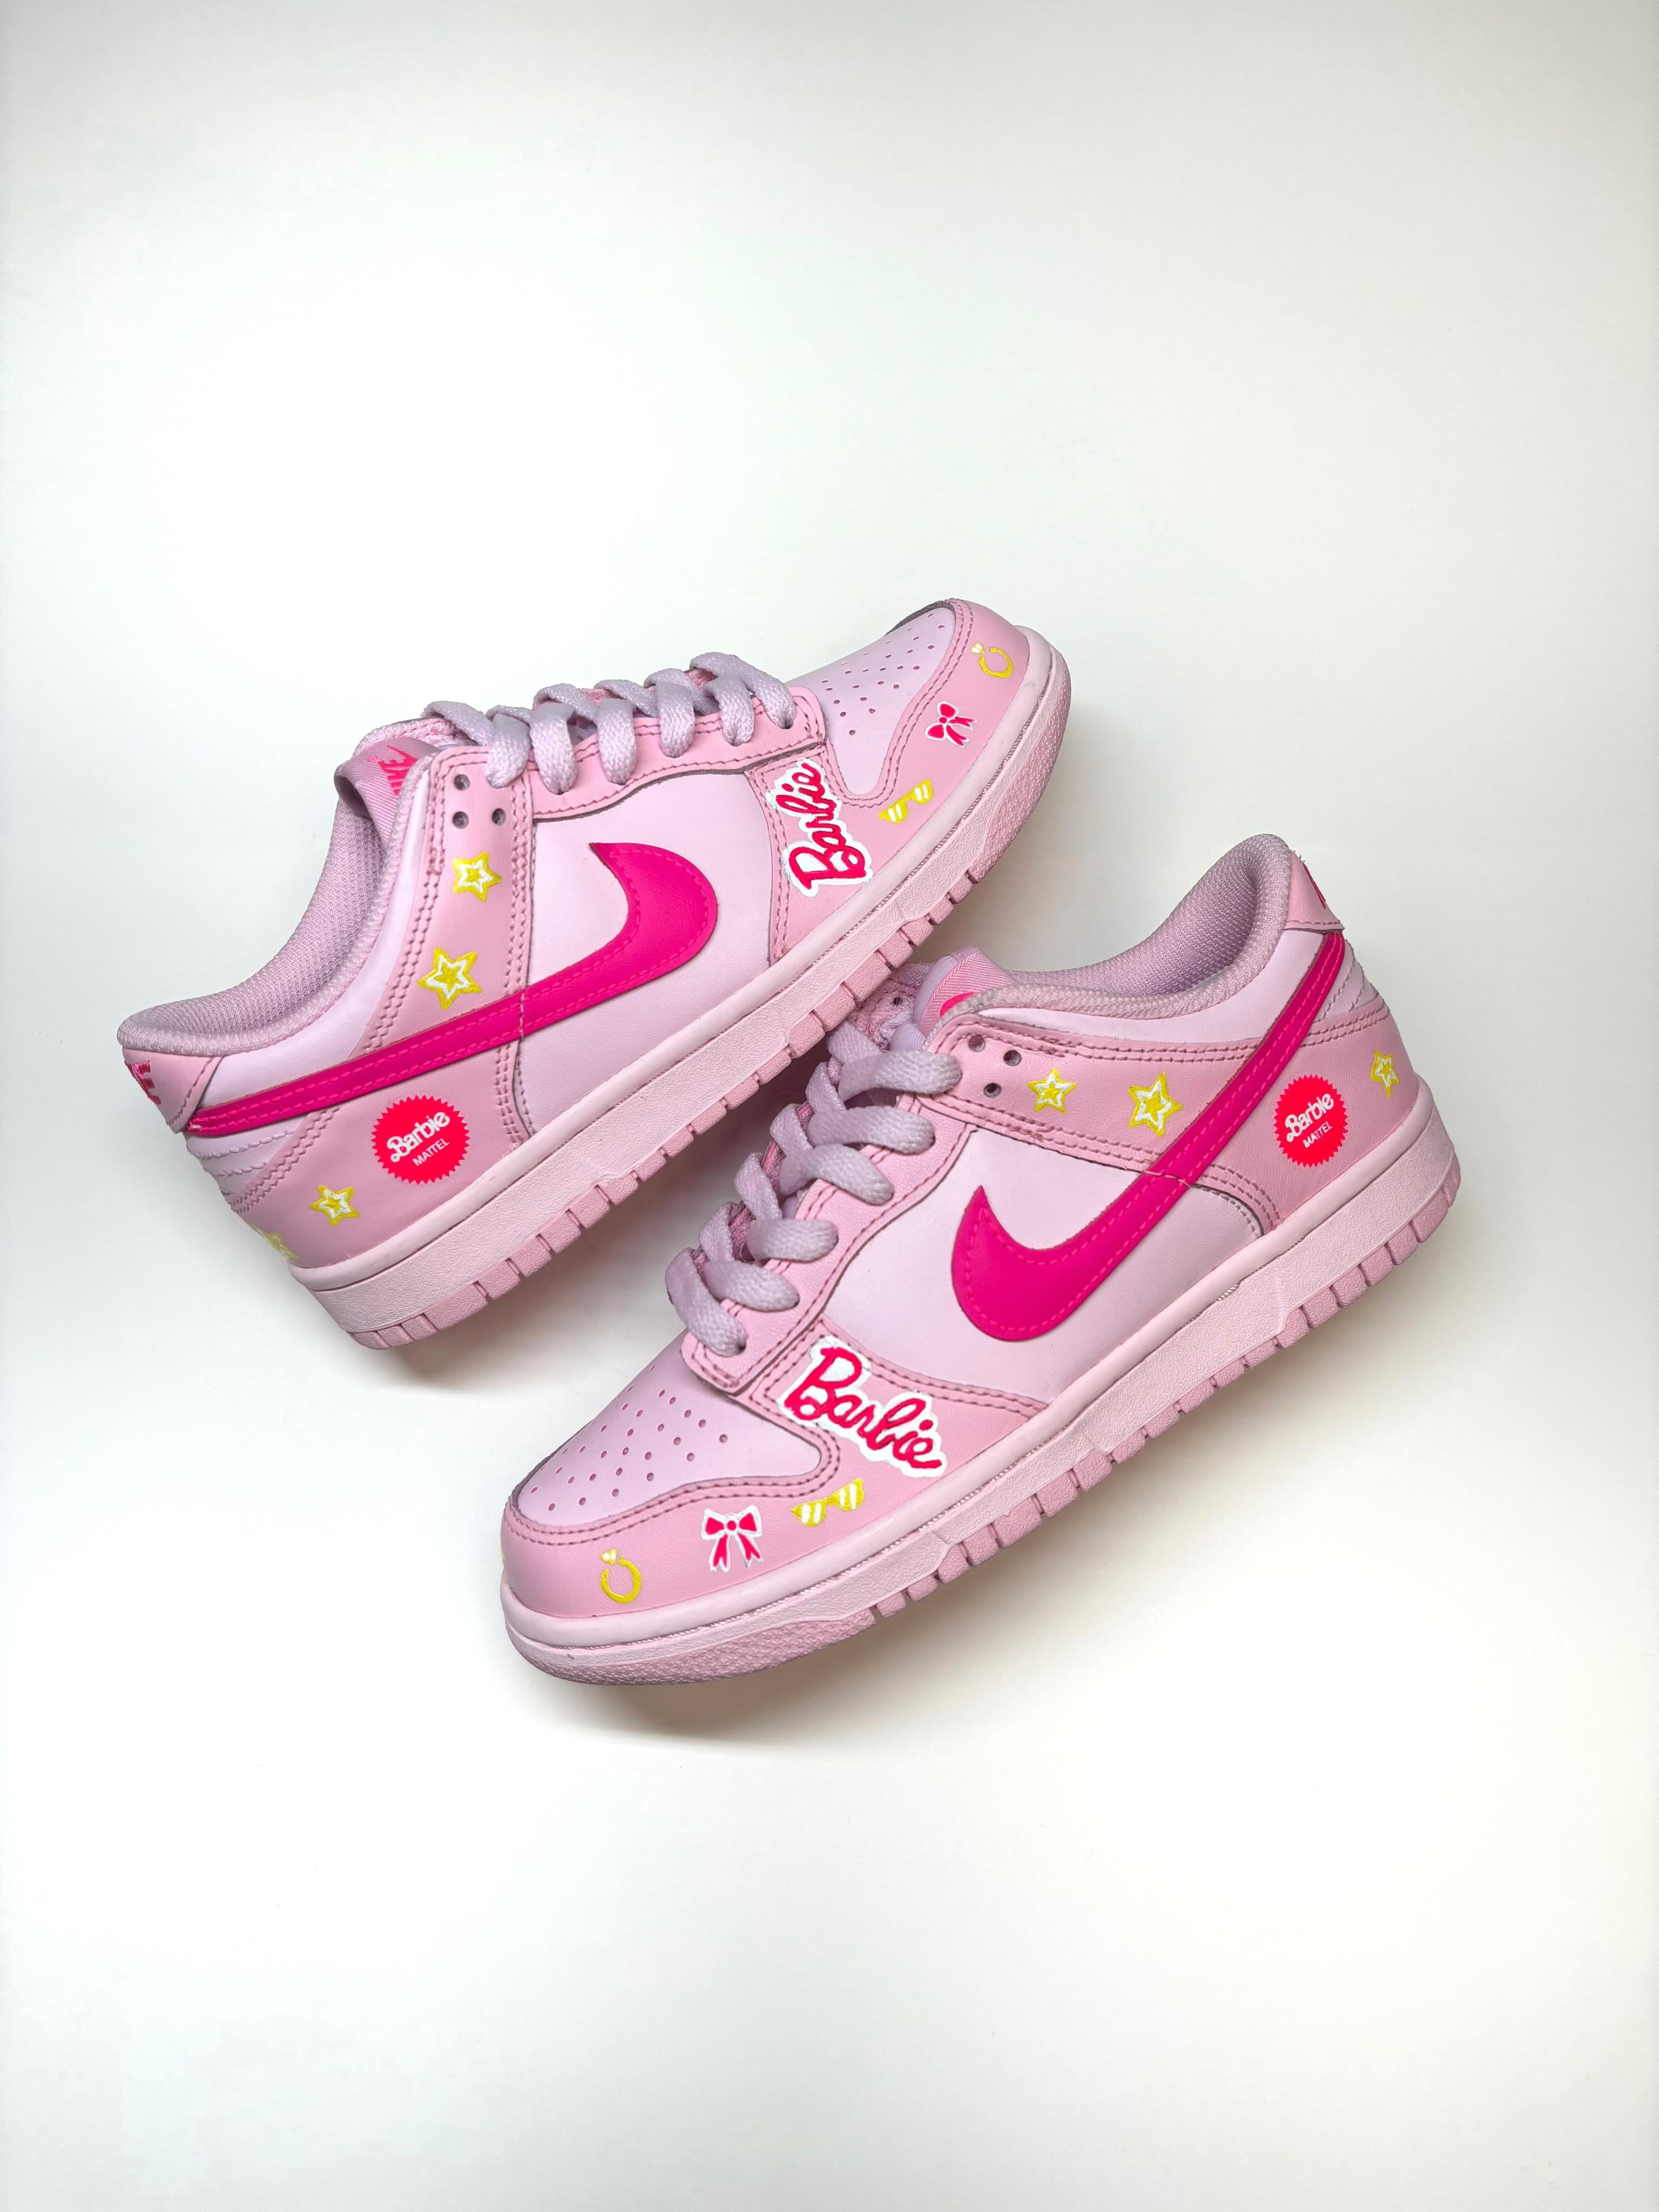 These Barbie Mattel Nike Dunk Concept inspired sneakers are hand-painted by Reed Revesz.  They are the perfect accessory for any Barbie fan.  Reed Revesz sneakers are custom made and typically take between 2-4 weeks to produce if we do not have your